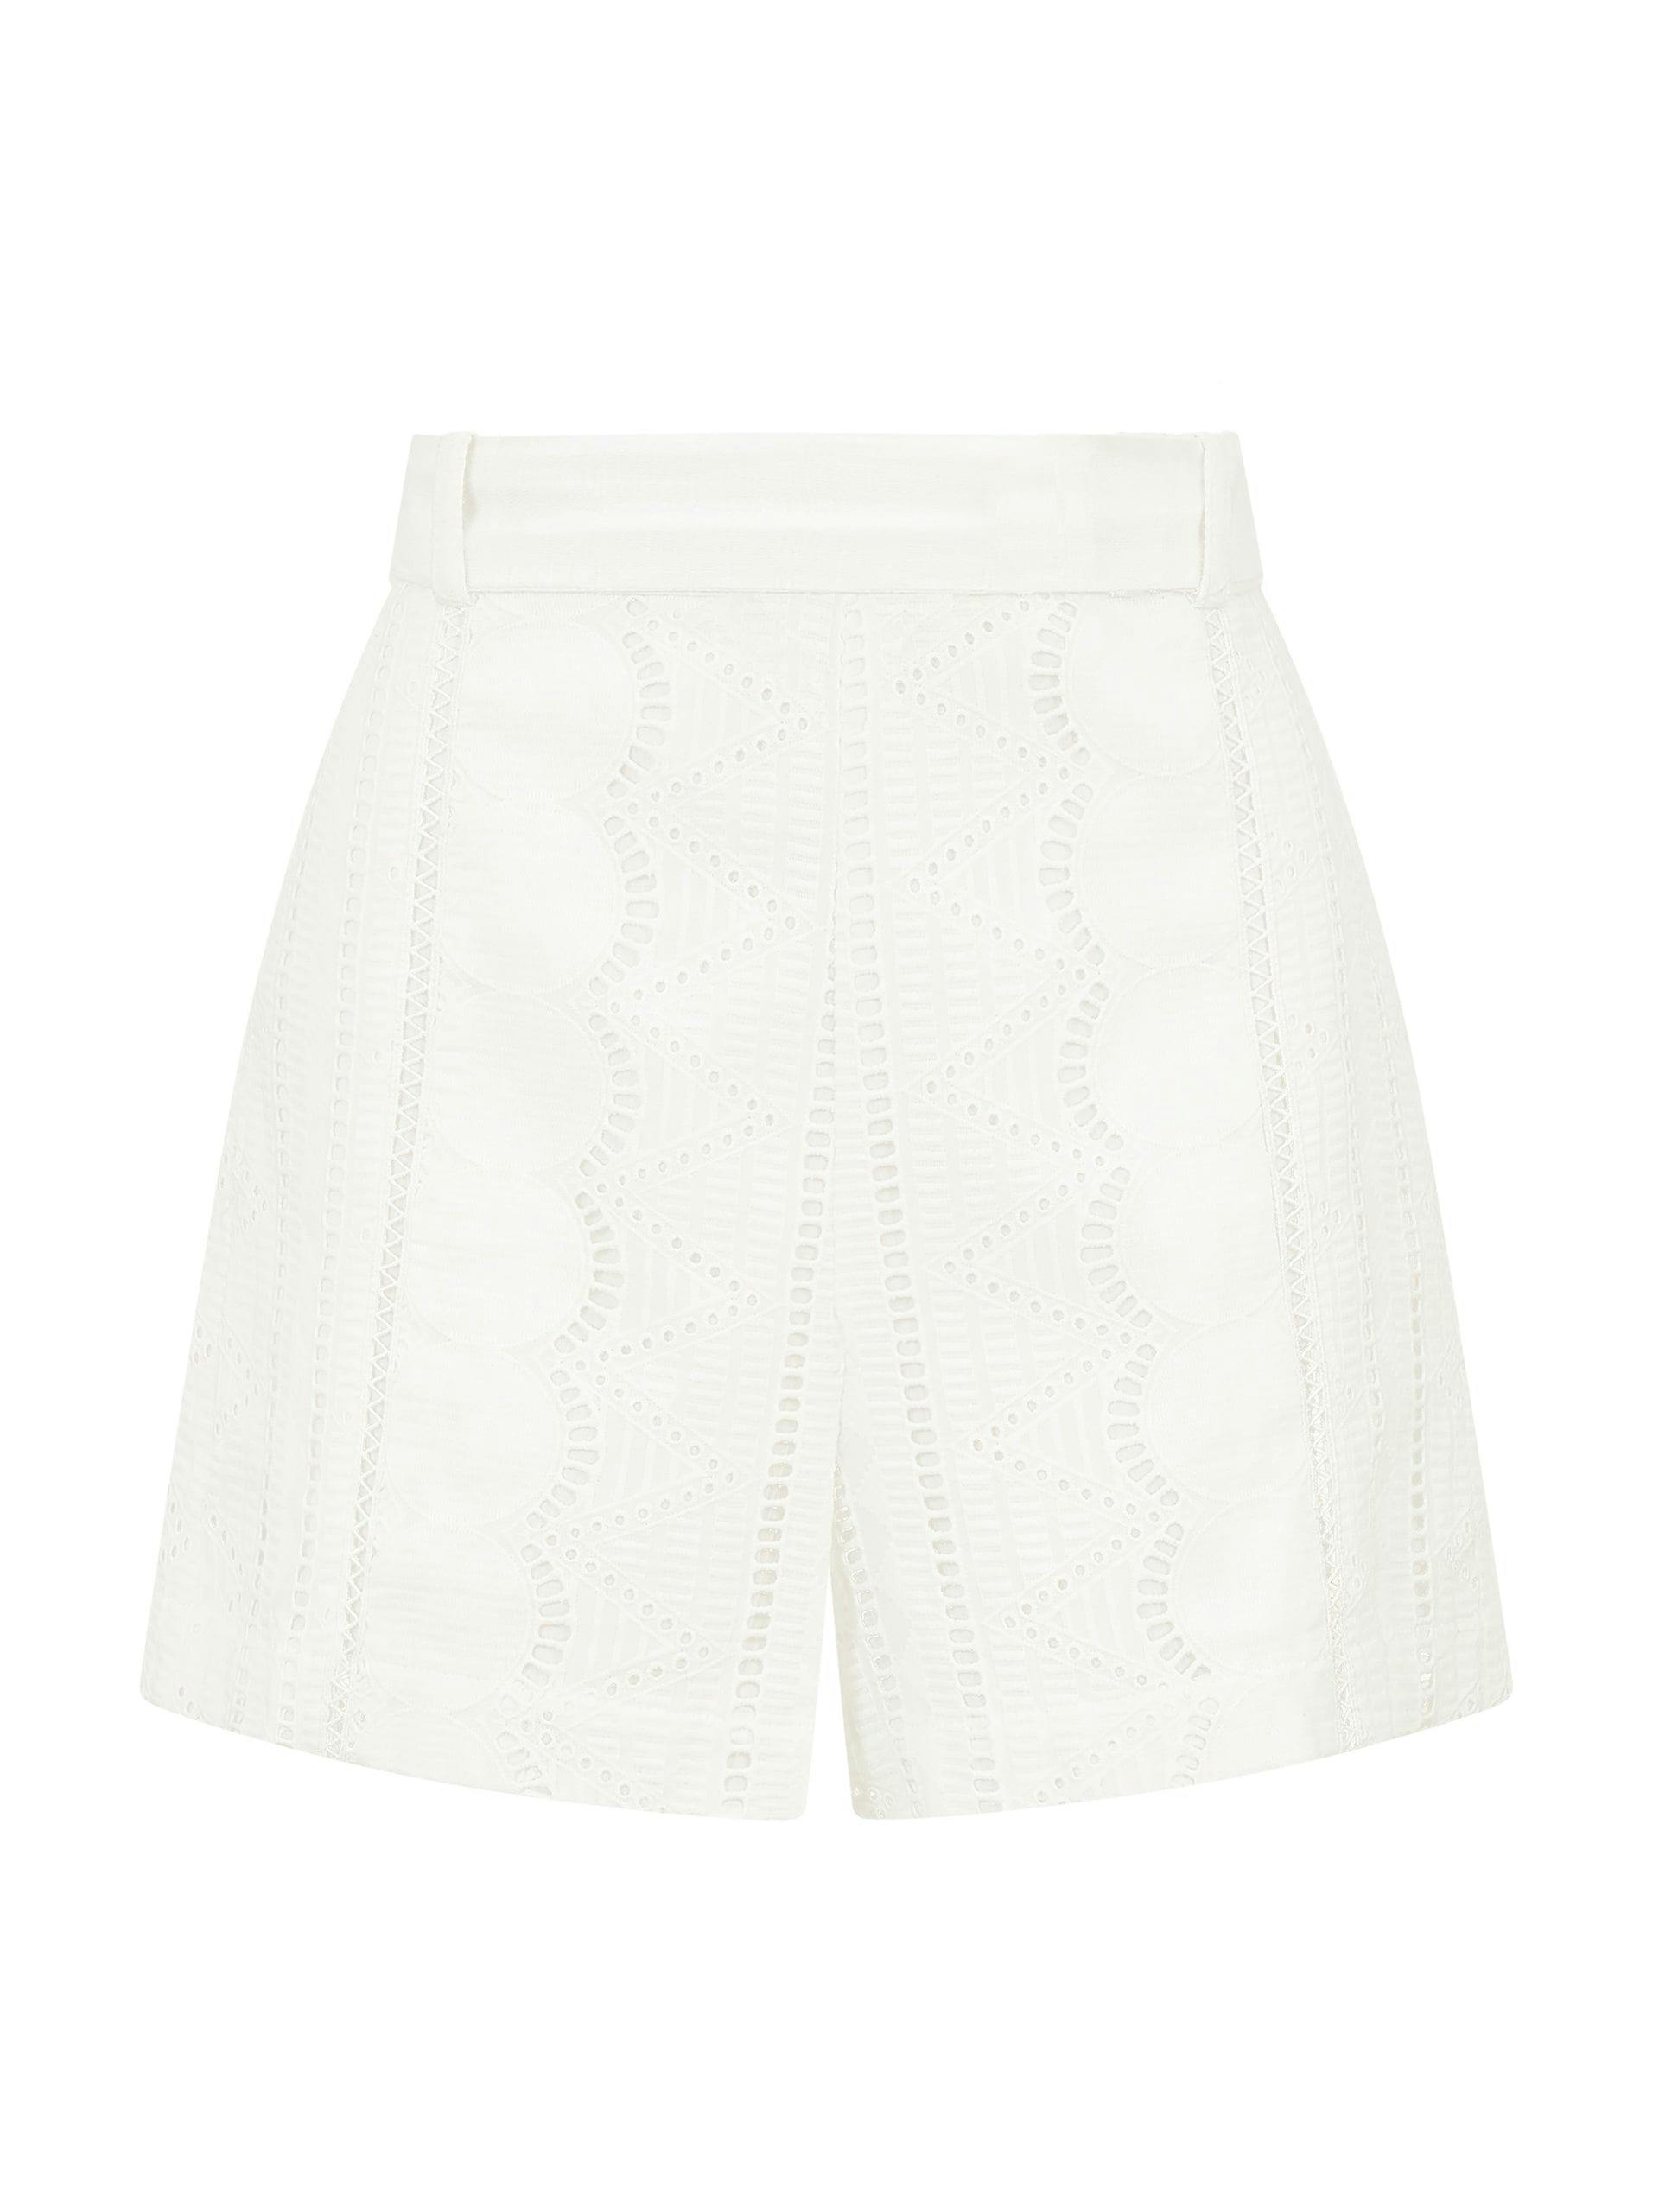 Embroidered white linen Petra shorts